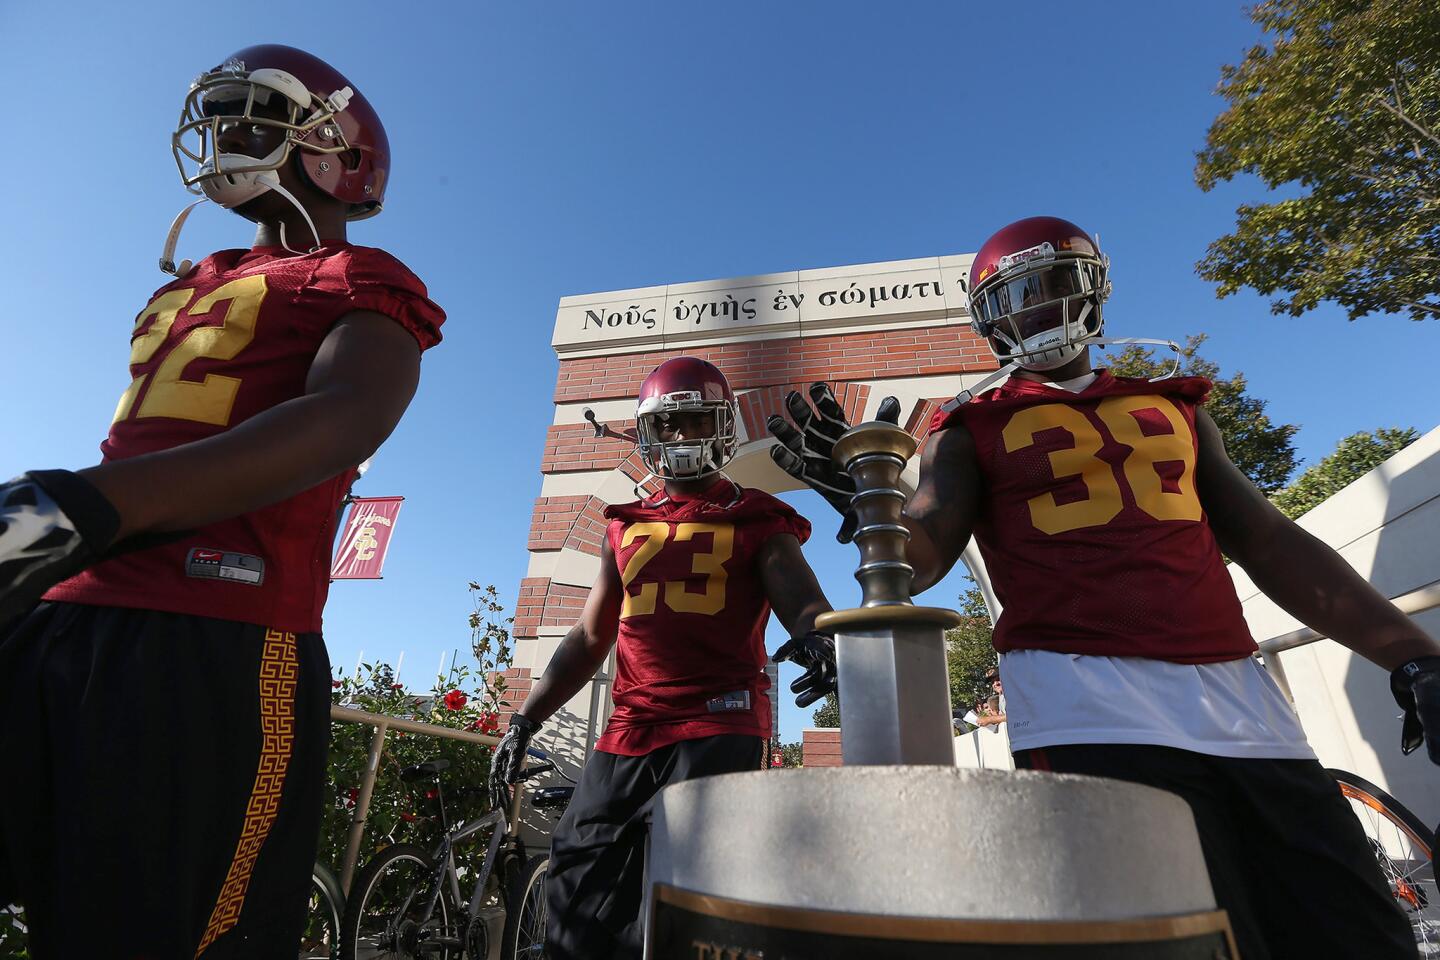 USC fullback Jahleel Pinner, right, touches a sword on the way to practice with teammates Justin Davis, left, and Tre Madden at Brian Kennedy-Howard Jones Field.